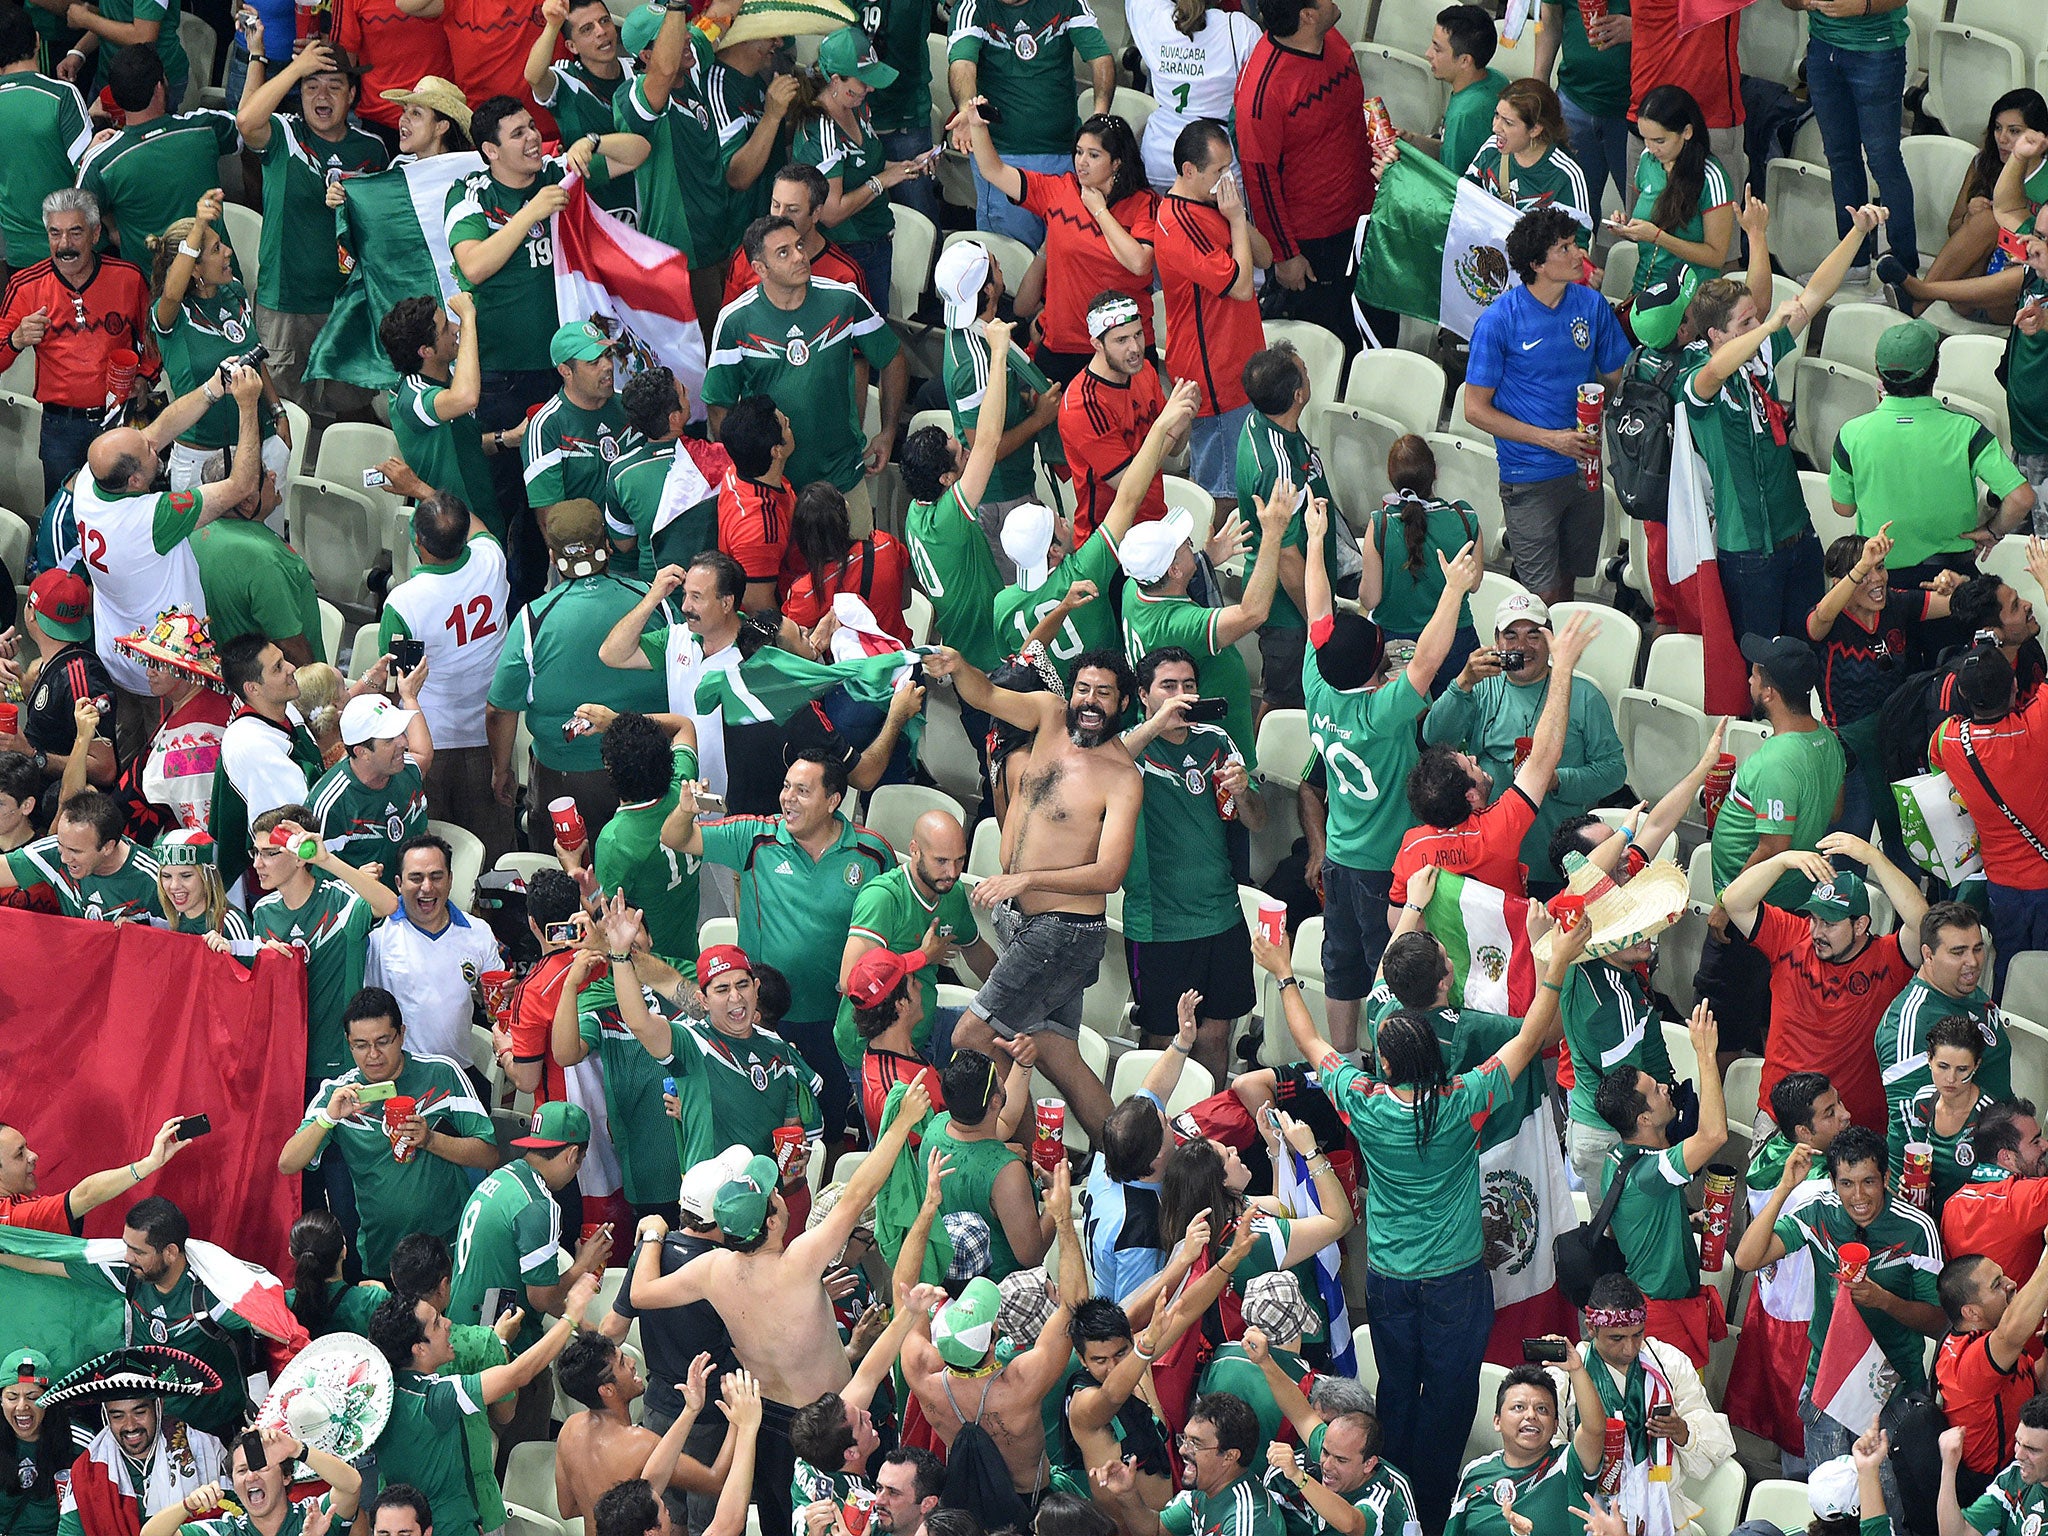 Mexican supporters cheer during a Group A football match between Brazil and Mexico in the Castelao Stadium in Fortaleza during the 2014 FIFA World Cup on June 17, 2014